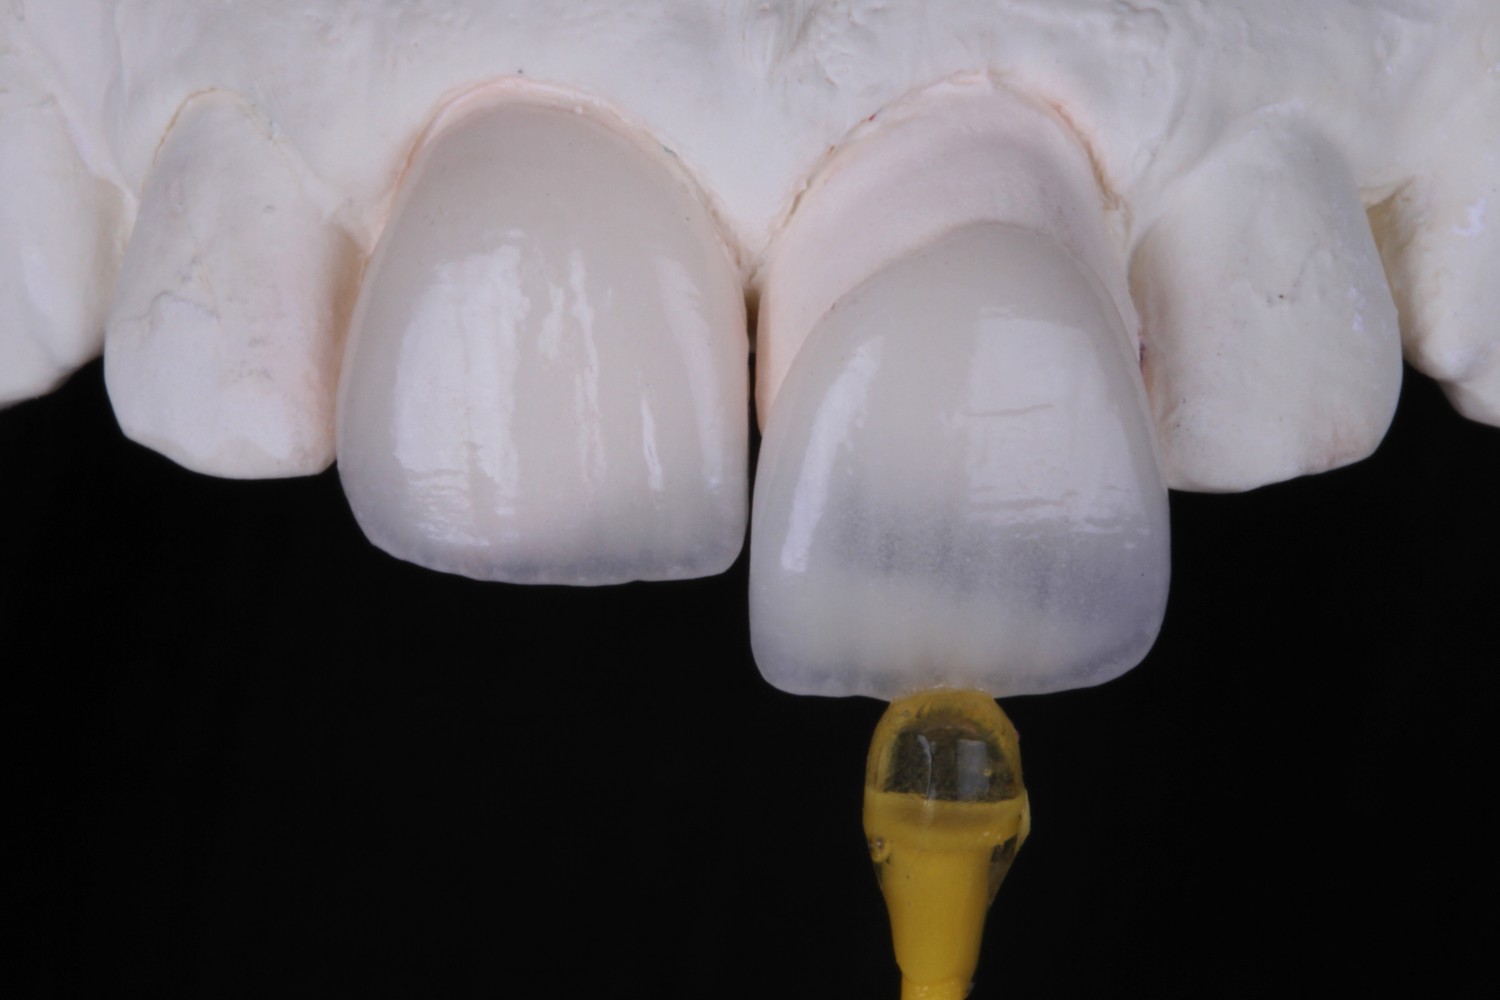 Ultrafine ceramic veneers cemented with preheated resin: a minimally invasive approach